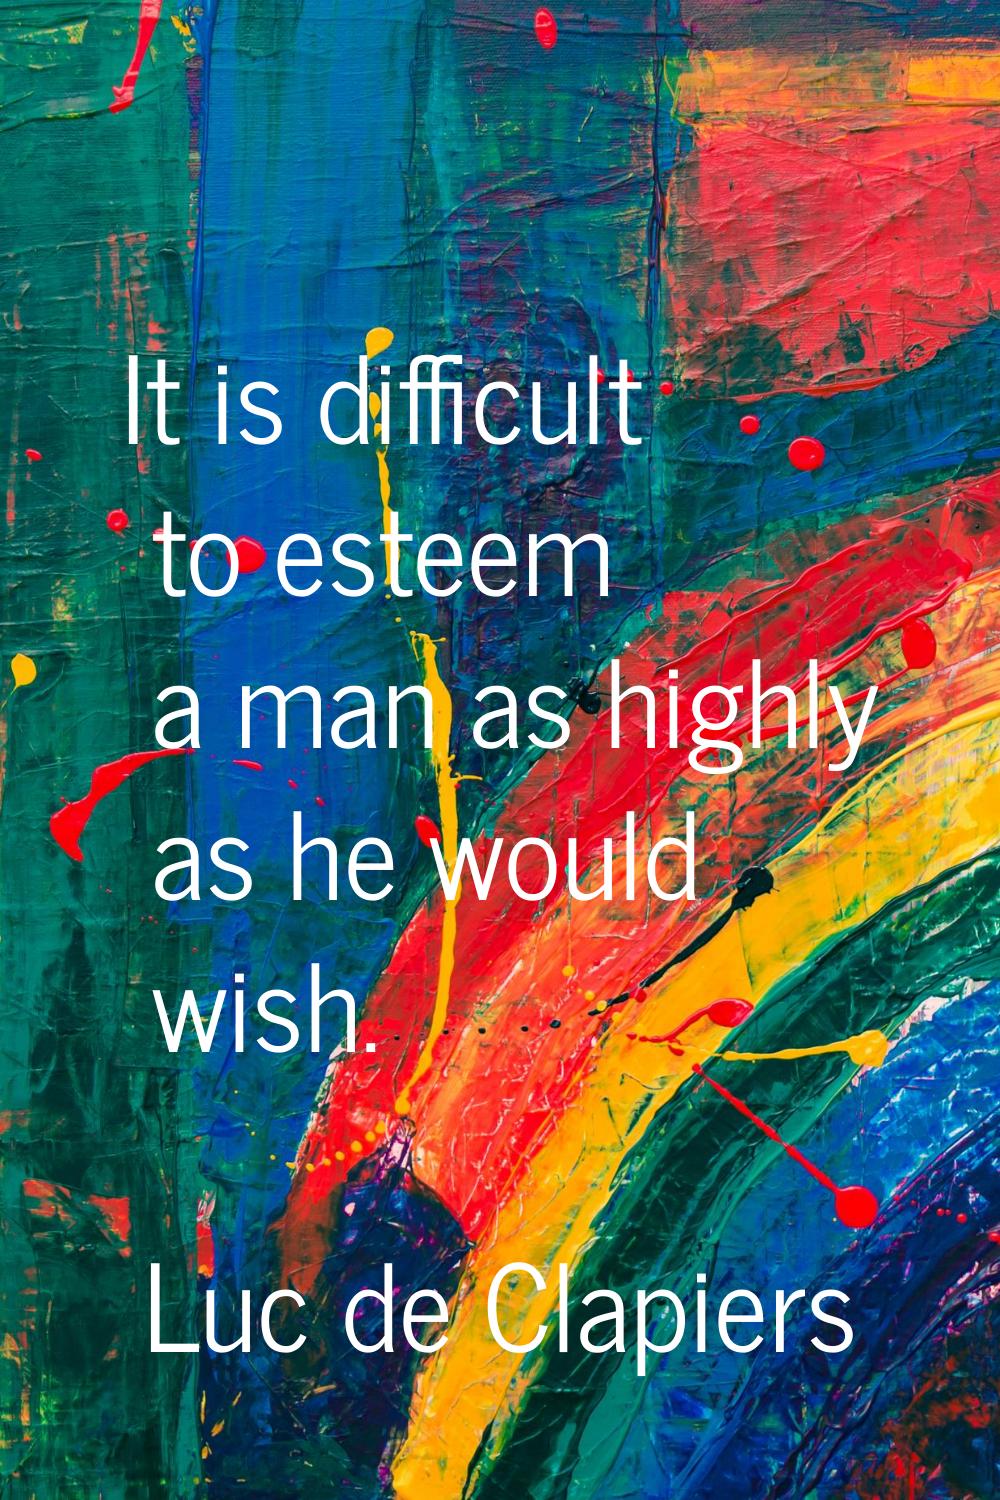 It is difficult to esteem a man as highly as he would wish.